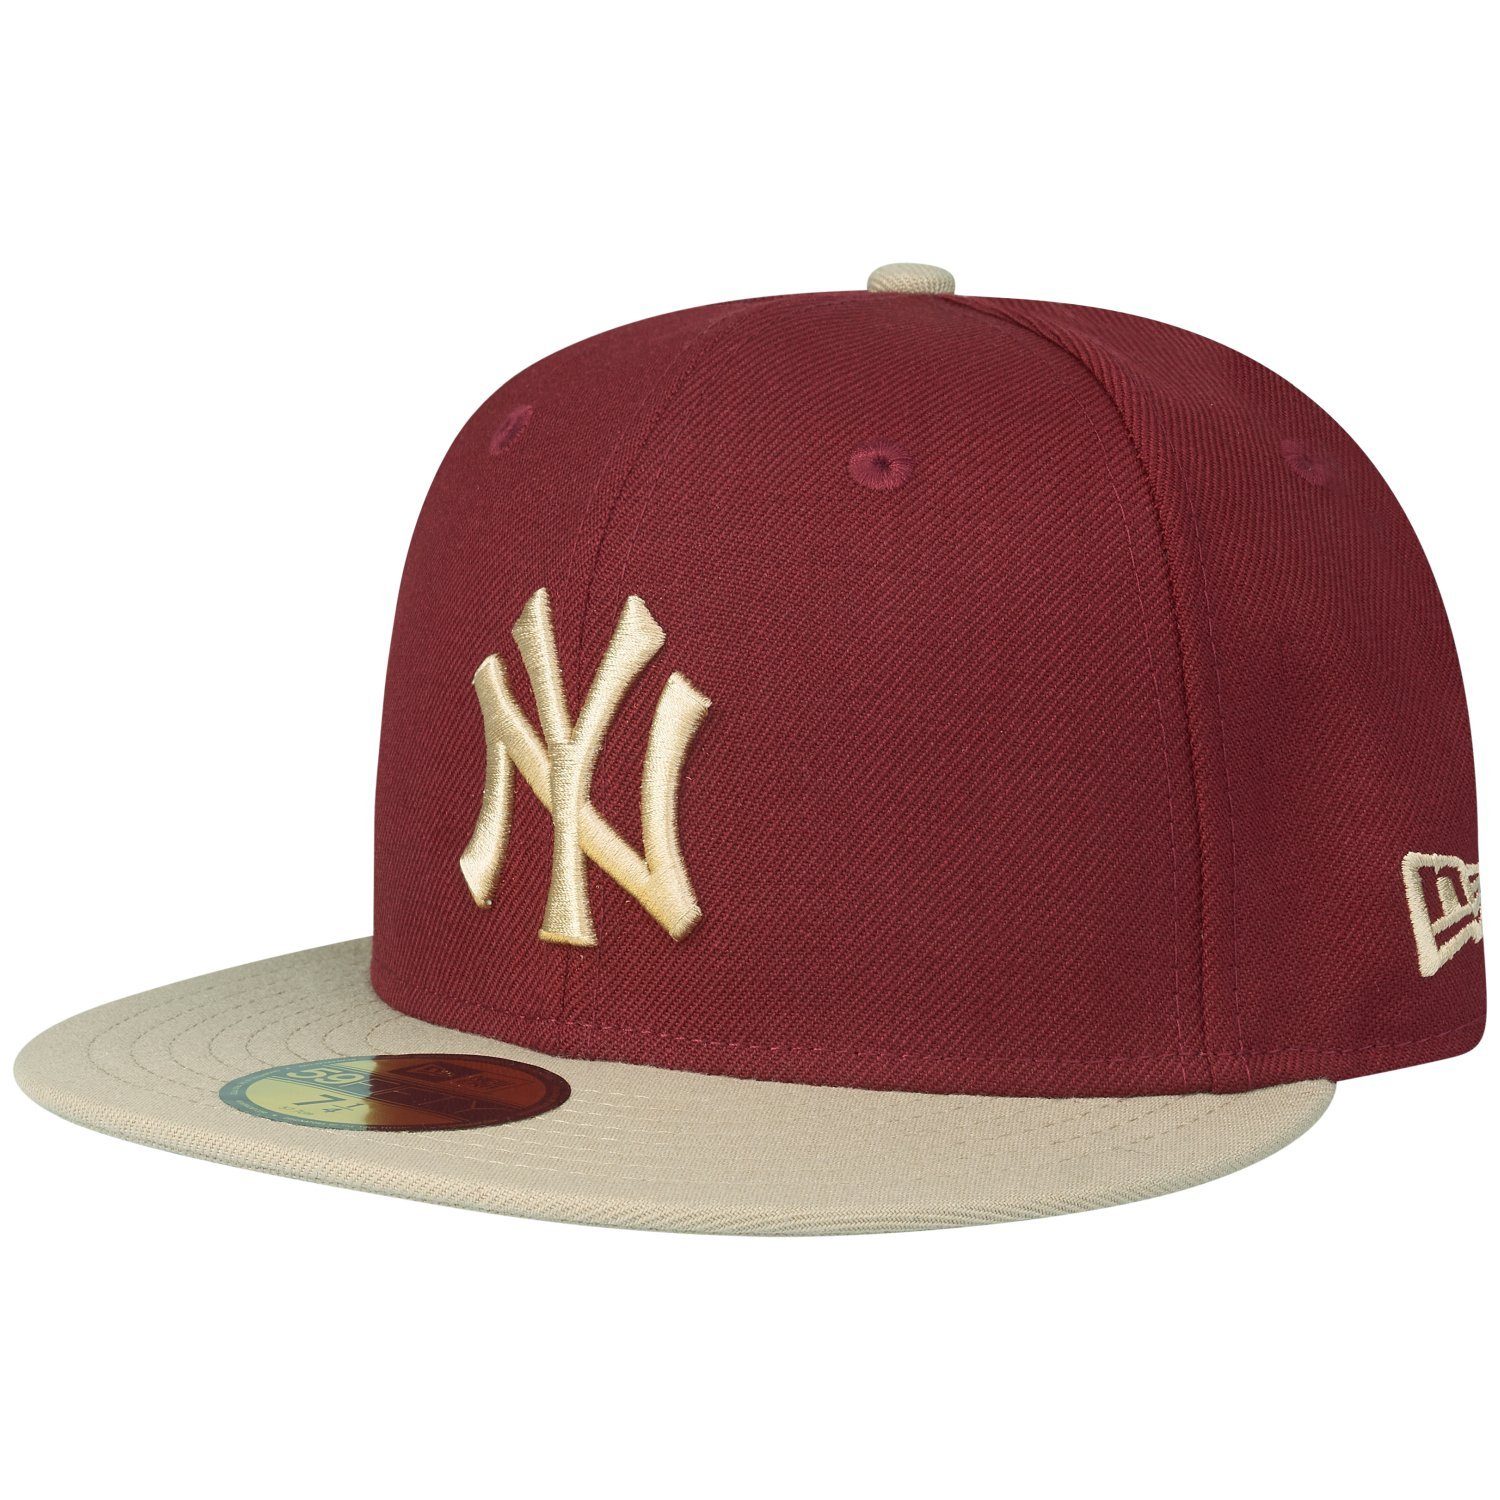 New Era Fitted Cap 59Fifty New York Yankees cardinal